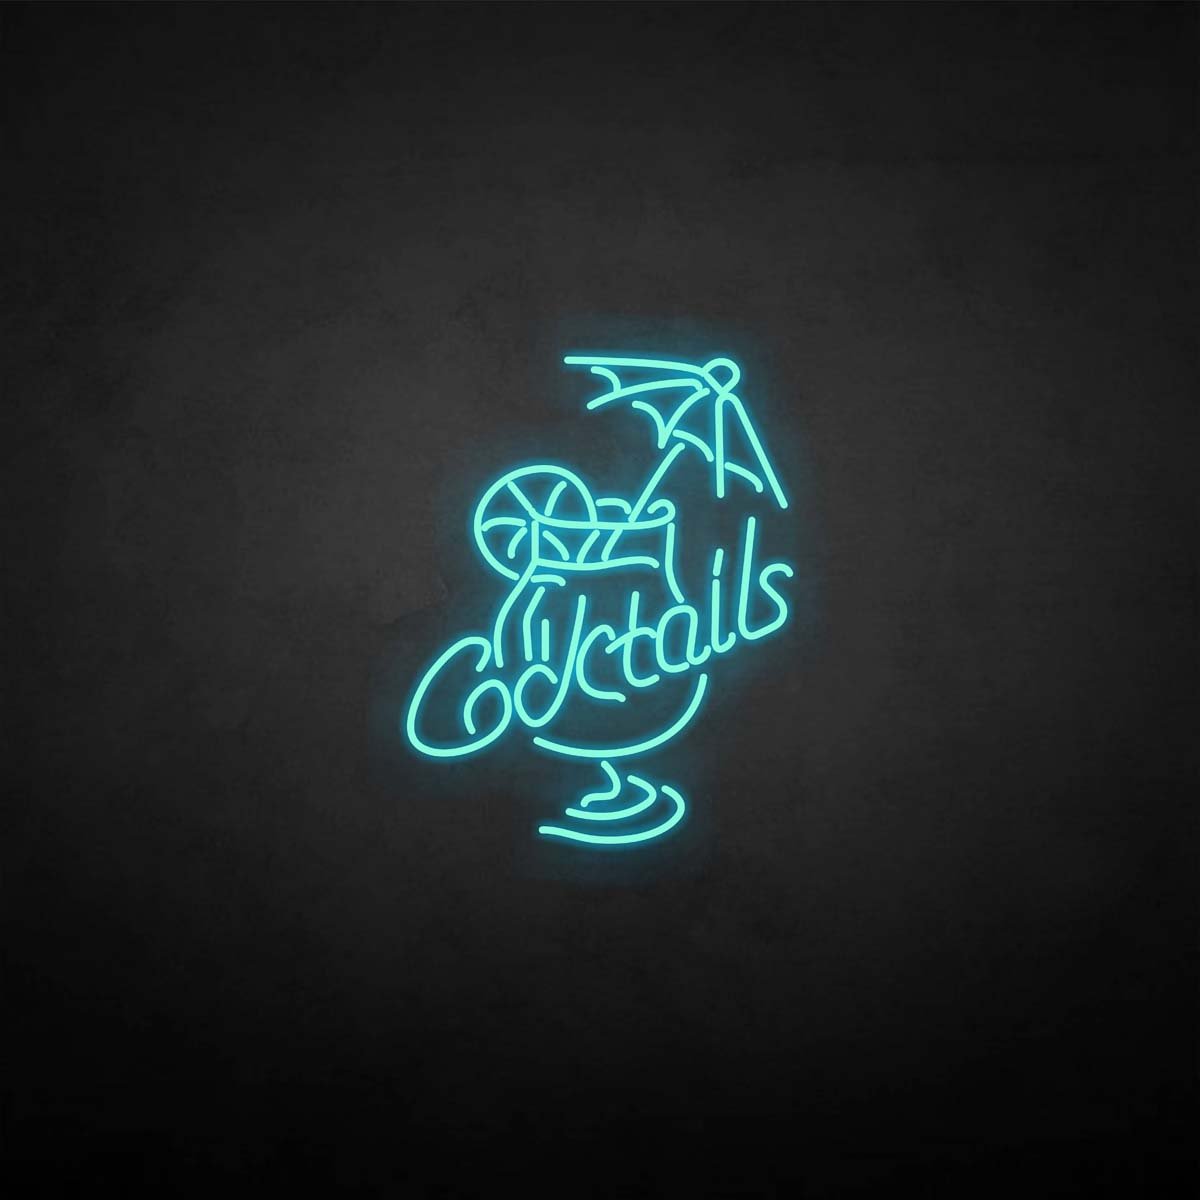 Cocktail neon sign